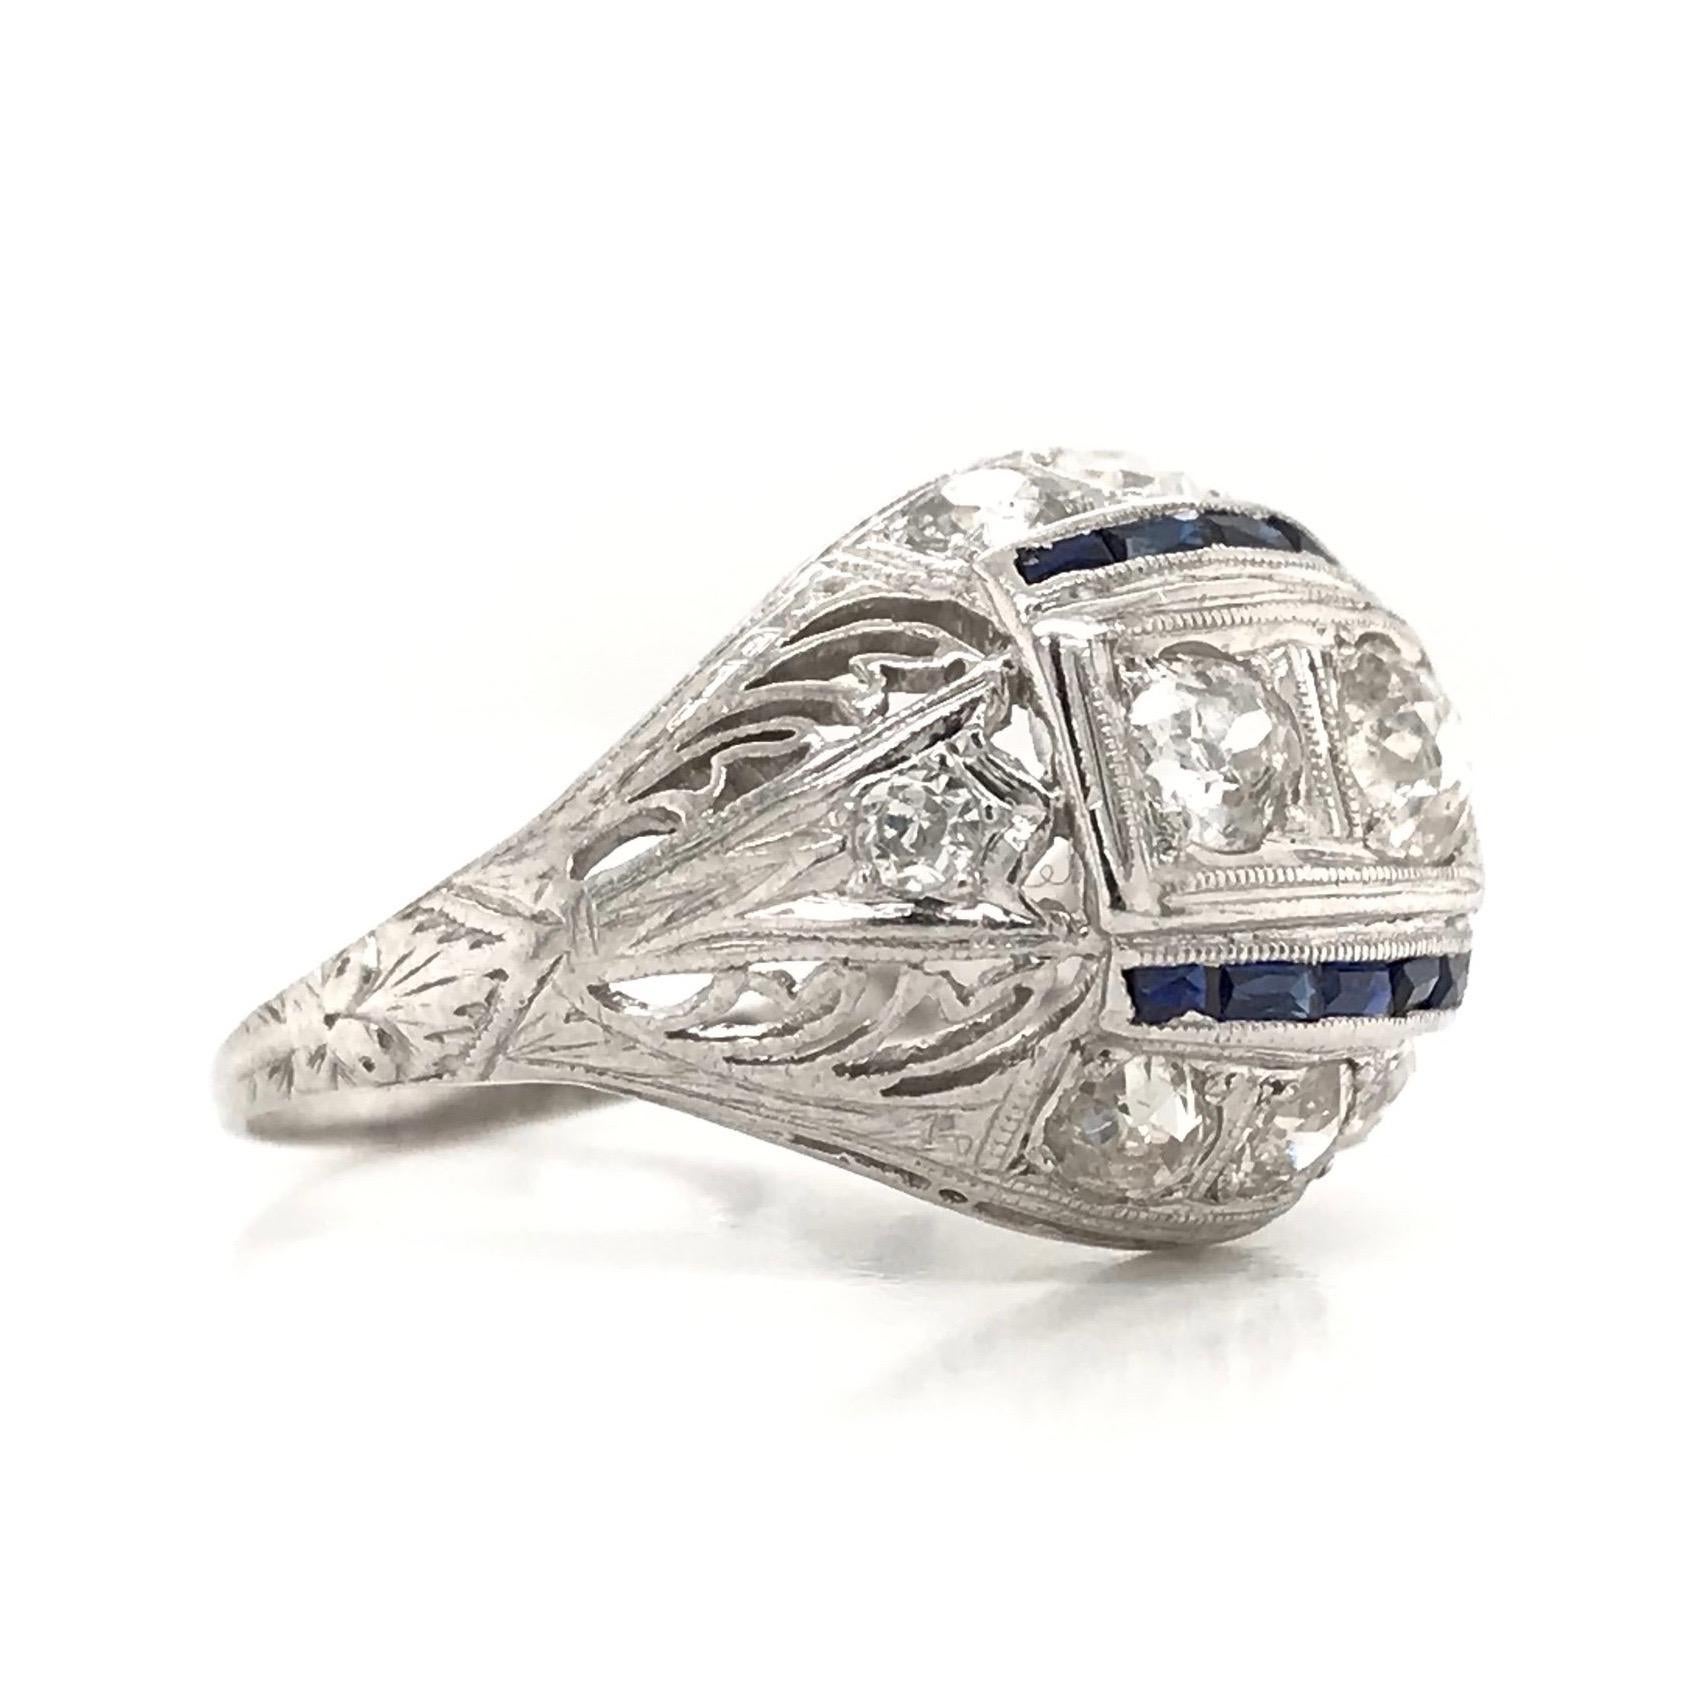 This antique piece was handcrafted sometime during the Art Deco design period ( 1920-1940 ). This exquisite antique ring is full of charming details and is quite exemplary of the wonderfully creative design period. The ring features 10 sparkling